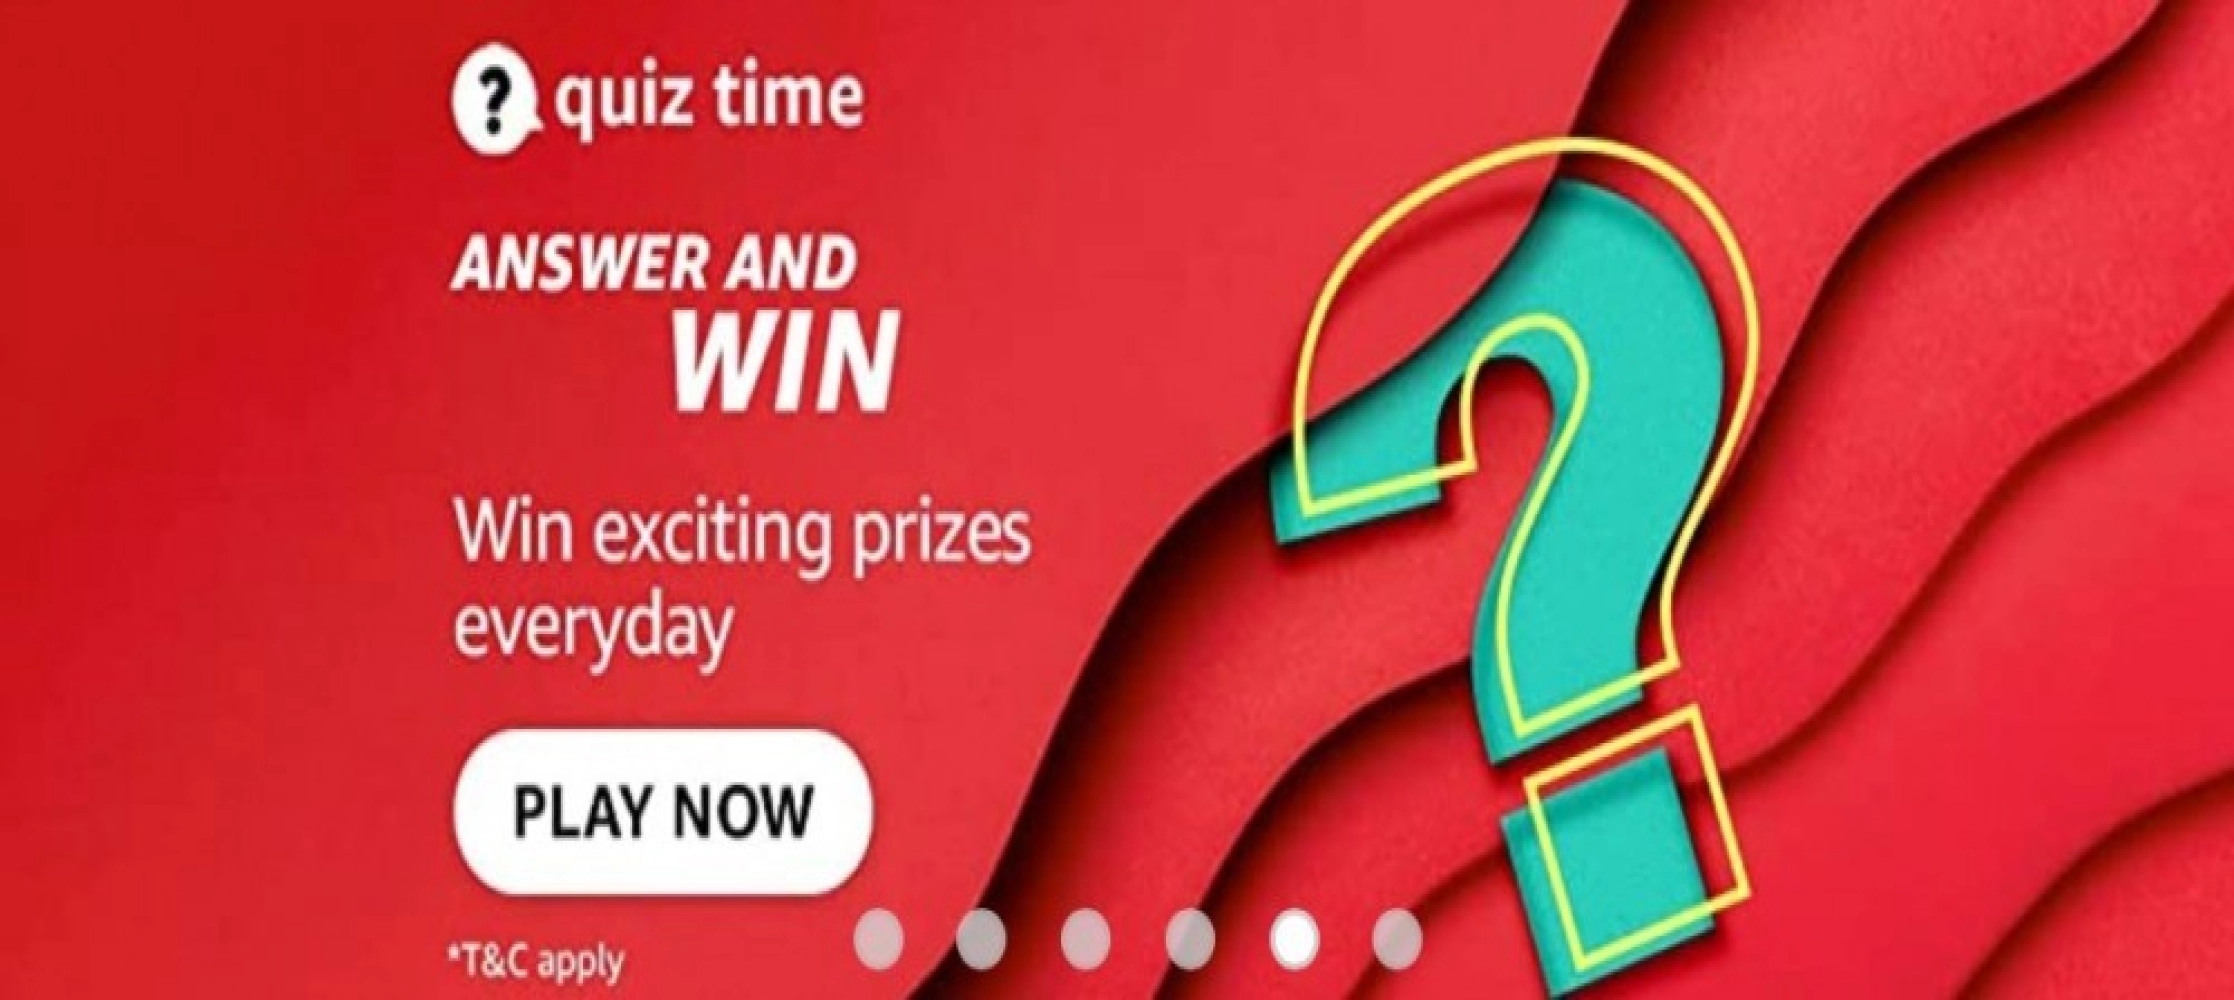 AMAZON QUIZ CONTEST: 5 MAY, 2022 - ANSWER TODAY FOR THE QUESTIONS AND GET A CHANCE TO WIN AMAZON PAY RS.40,000